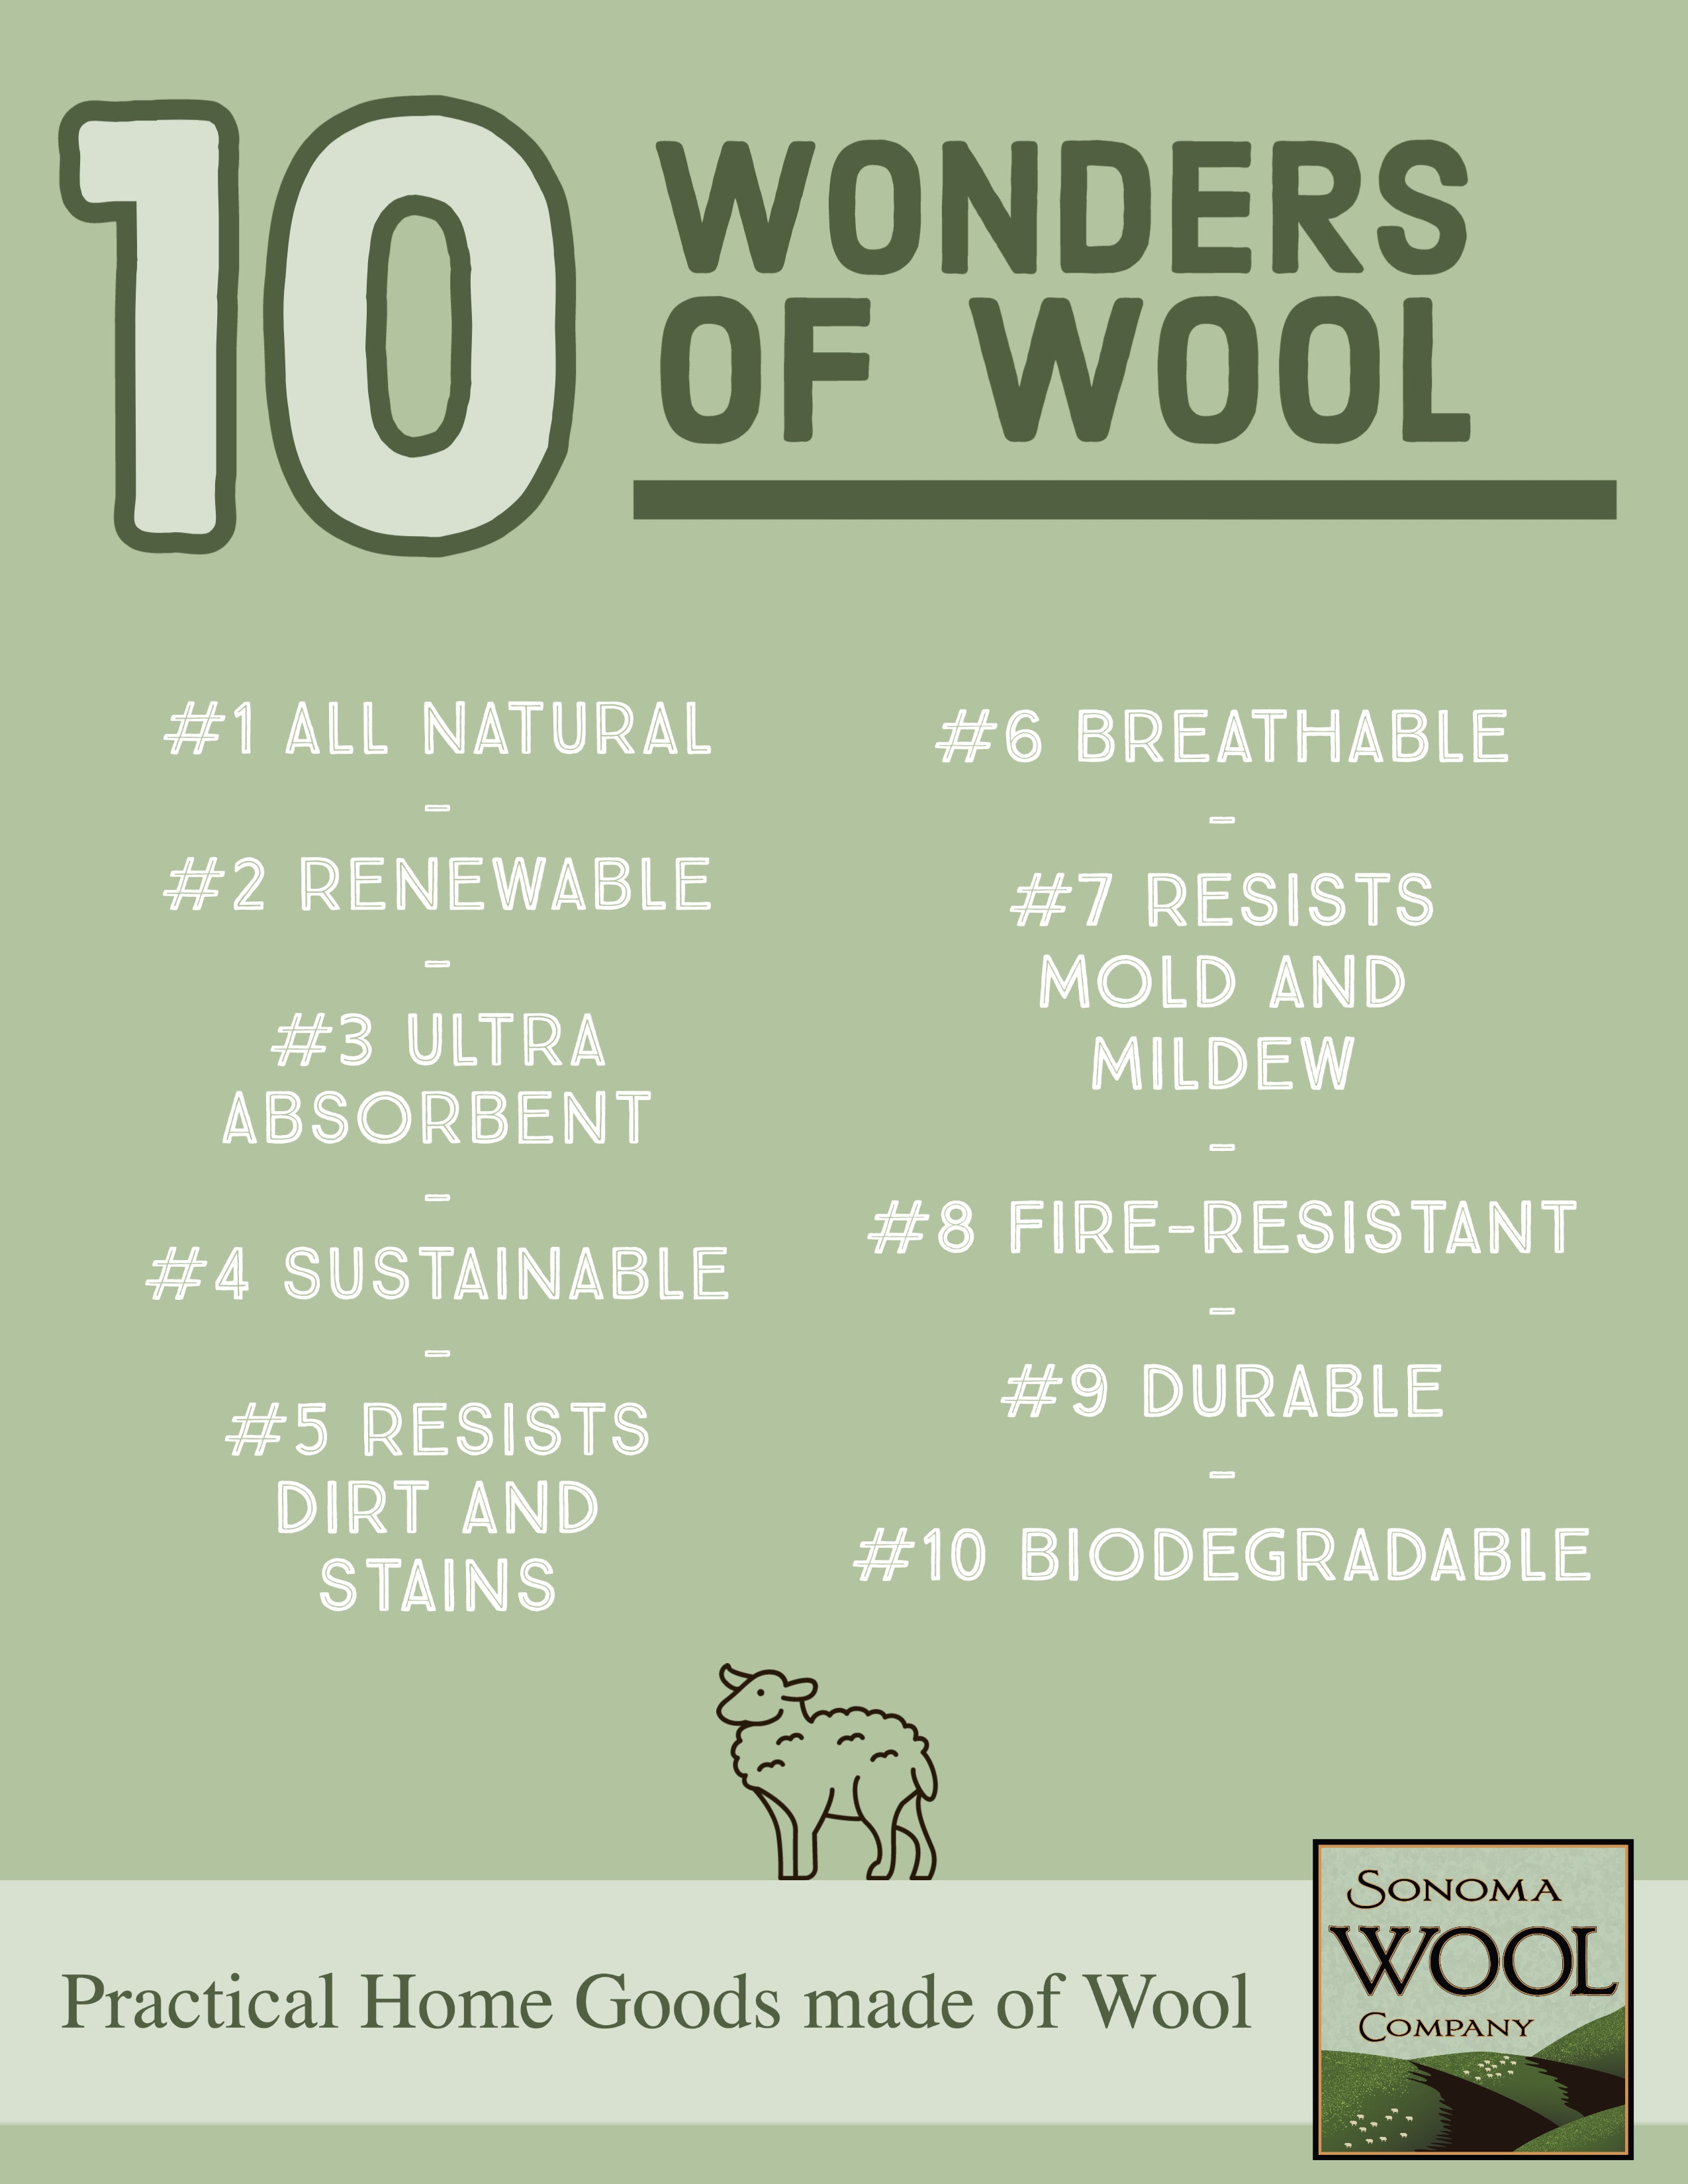 Sonoma Wool Company's 10 Wonders of Wool Infographic